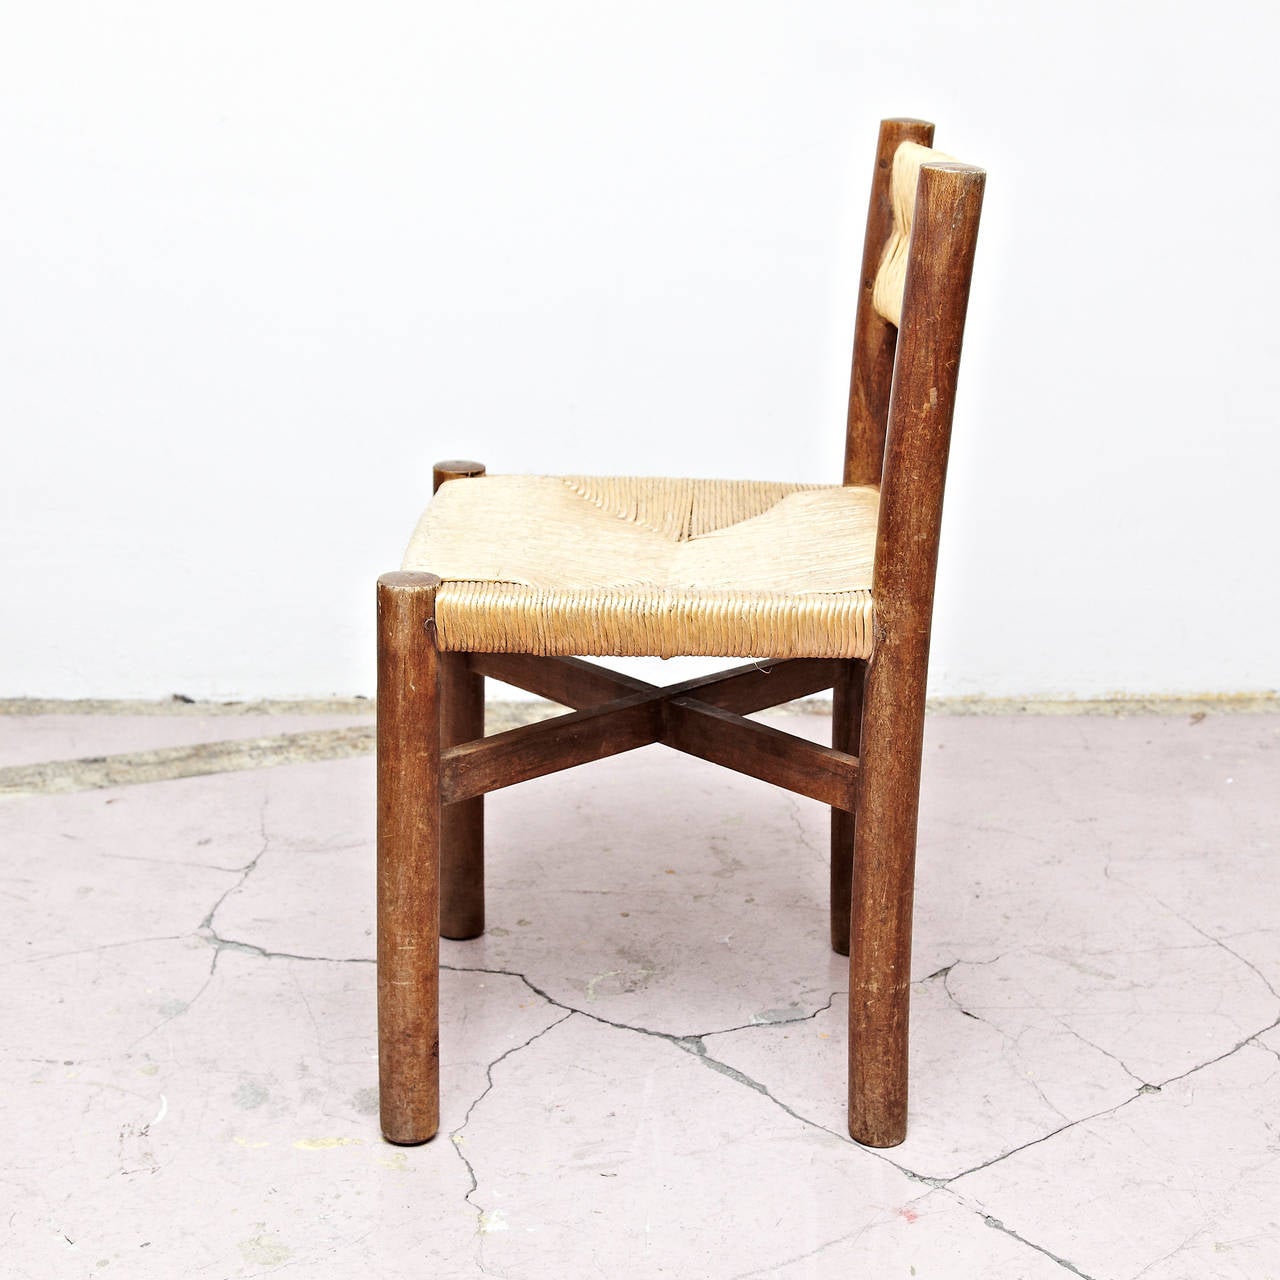 Dining chair, model Meribel, designed by Charlotte Perriand, circa 1950.
Manufactured by Georges Blanchon (France)
Wood base and legs, and original rush seat and backrest.

In original condition, with minor wear consistent with age and use,